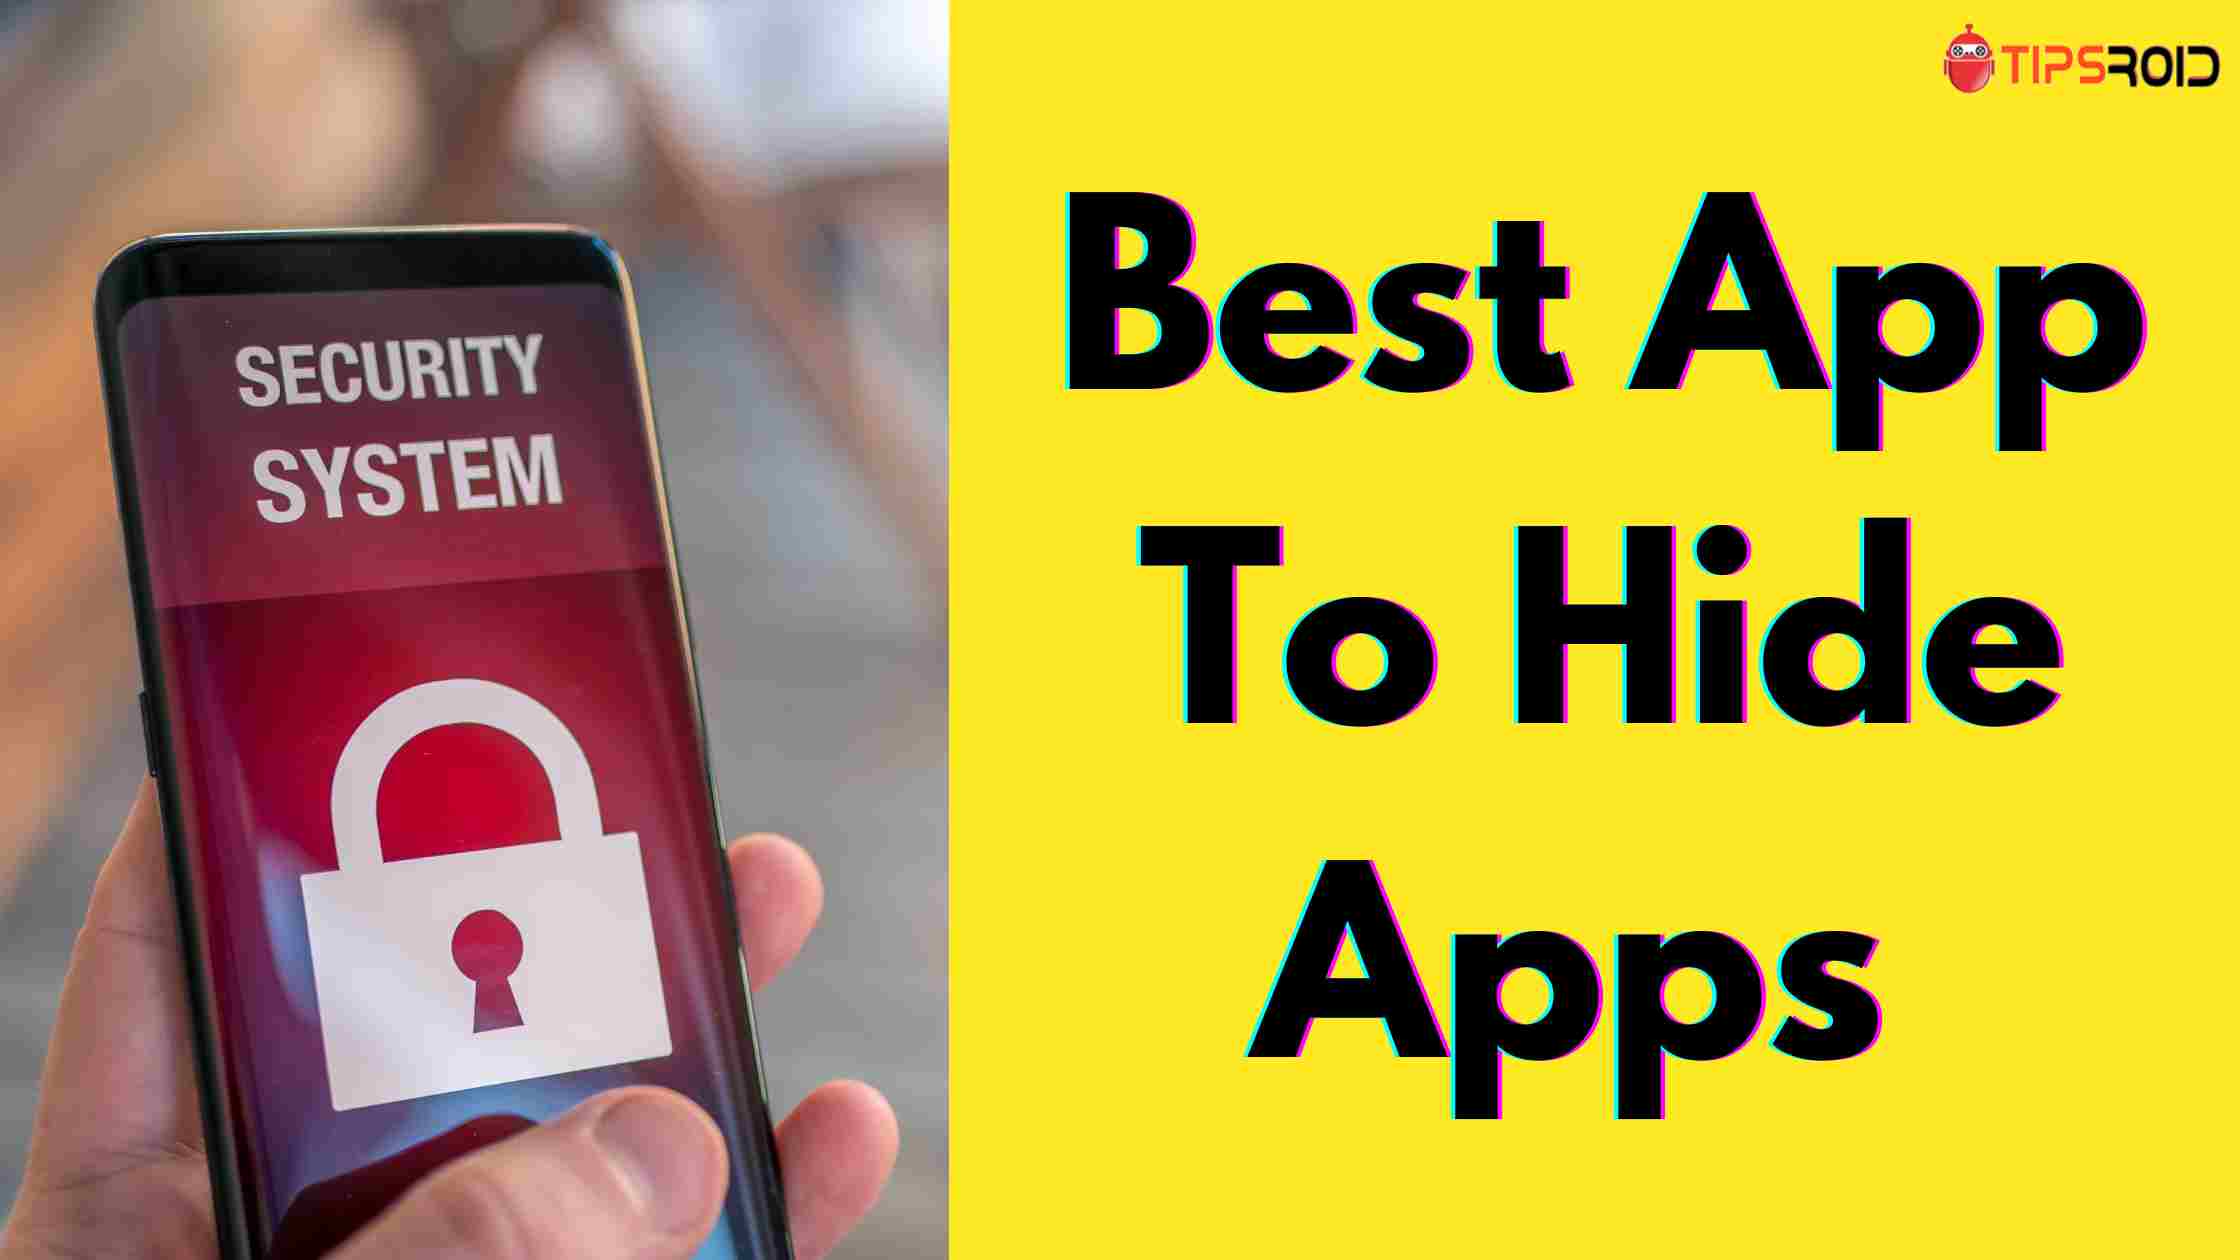 10 Best App To Hide Apps For Android and iPhone